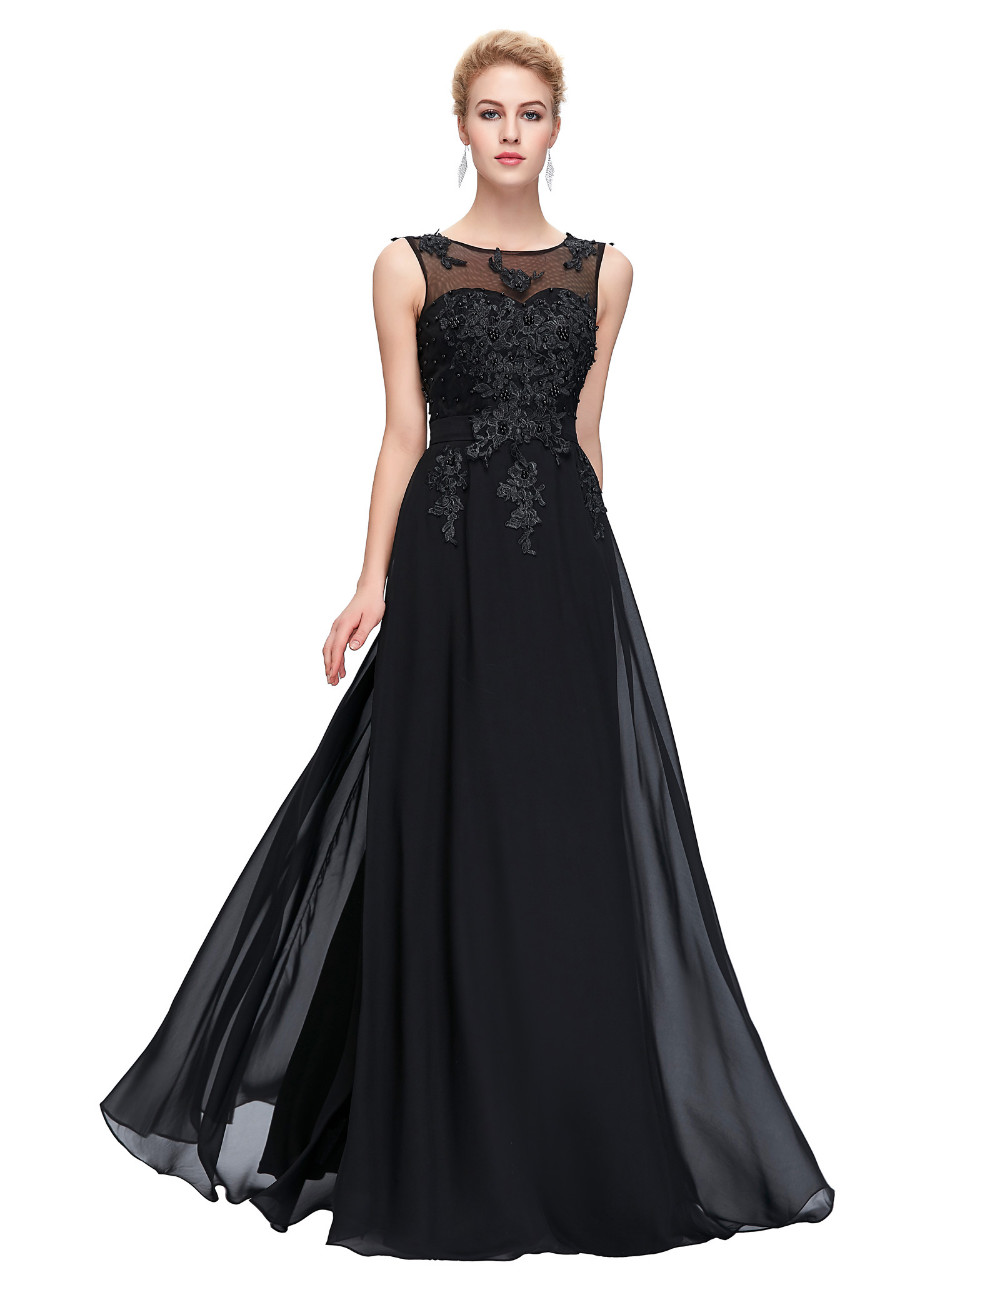 Black Illusion Chiffon Floor Length Prom Dress, Formal Gown,Evening Dress With Lace Appliques